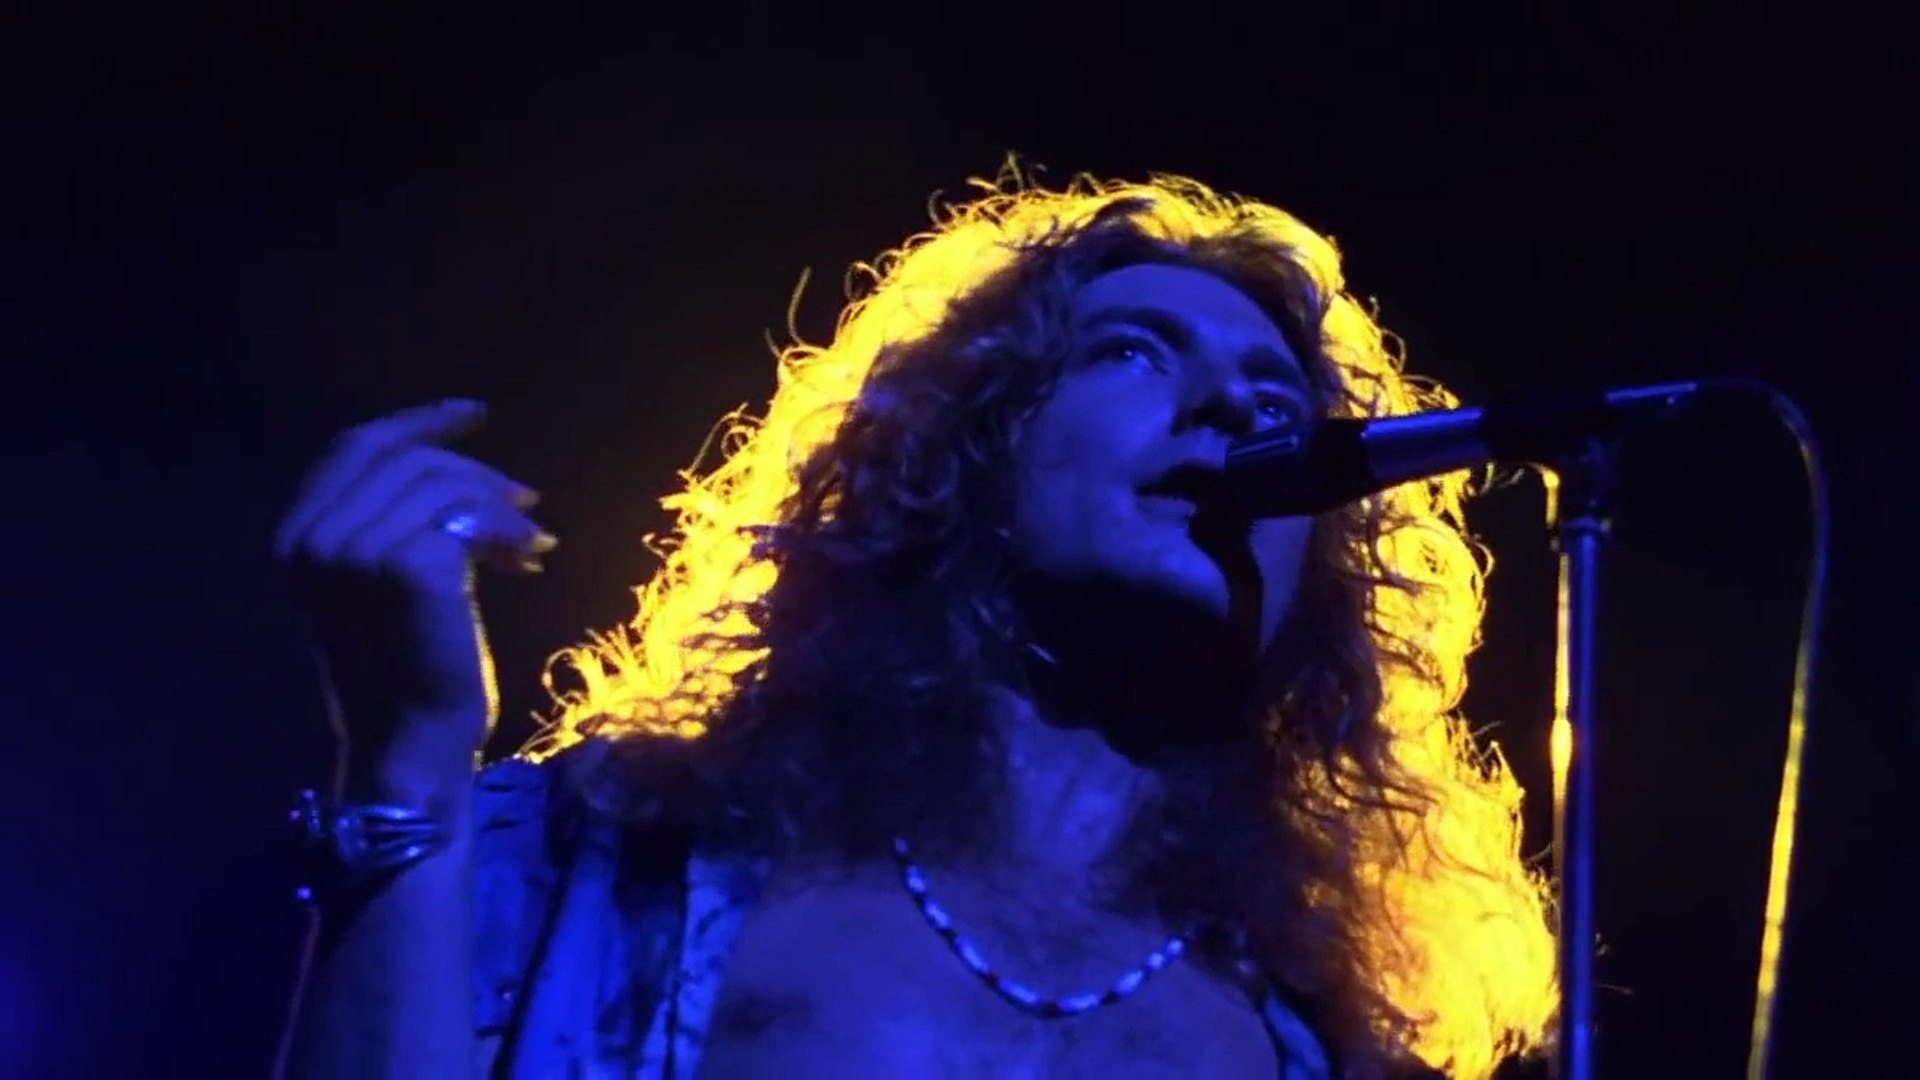 Led Zeppelin - Stairway to Heaven Live (HD) - video Dailymotion